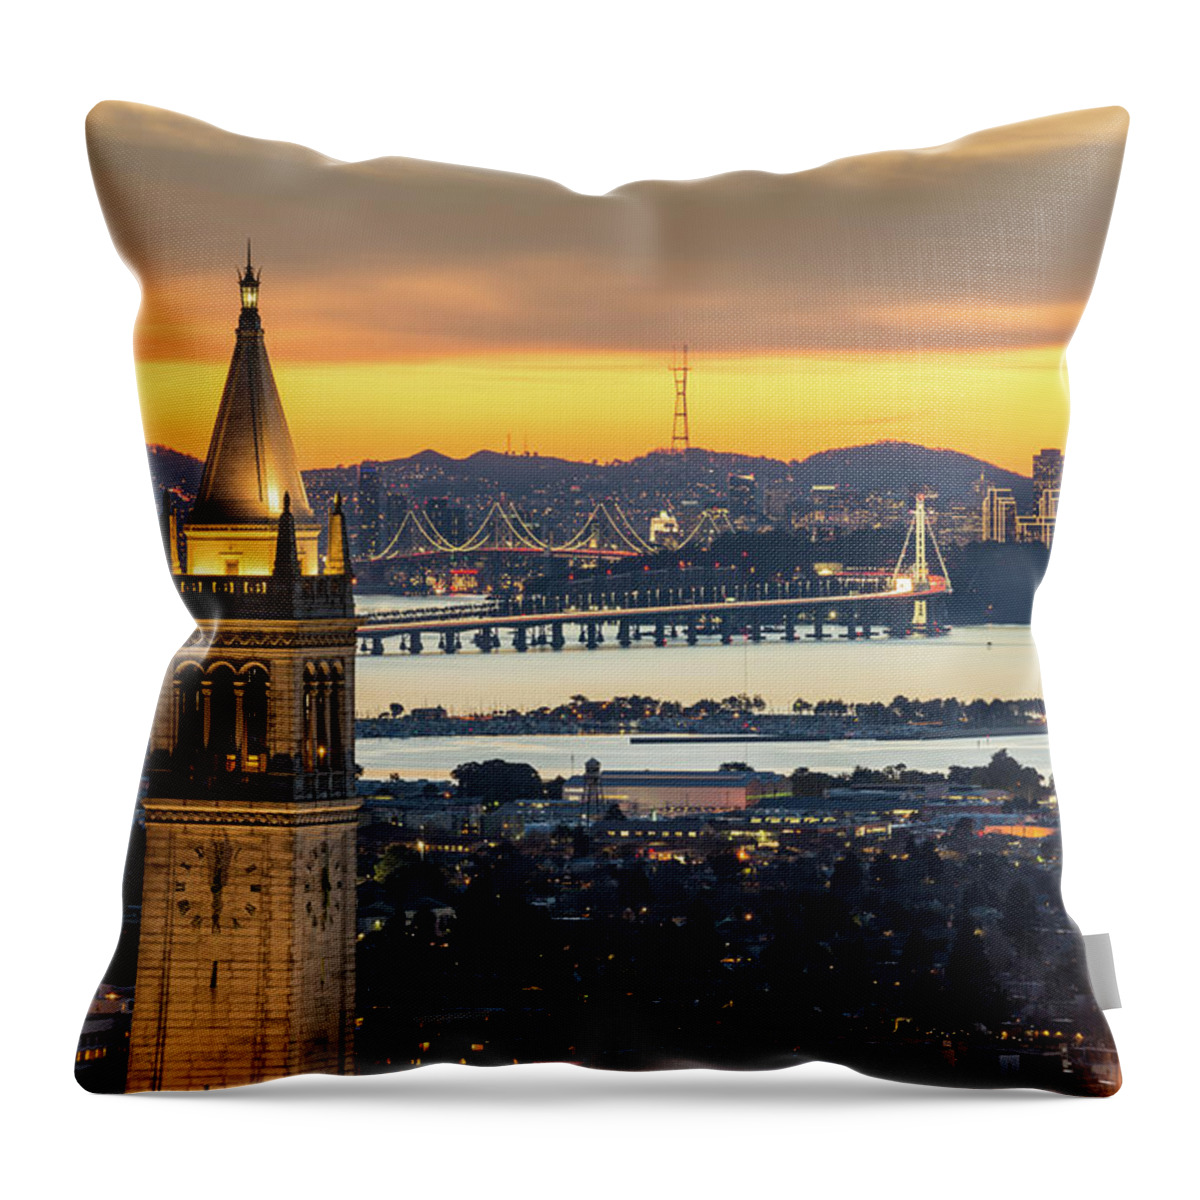 San Francisco Throw Pillow featuring the photograph Berkeley Campanile With Bay Bridge And by Chao Photography